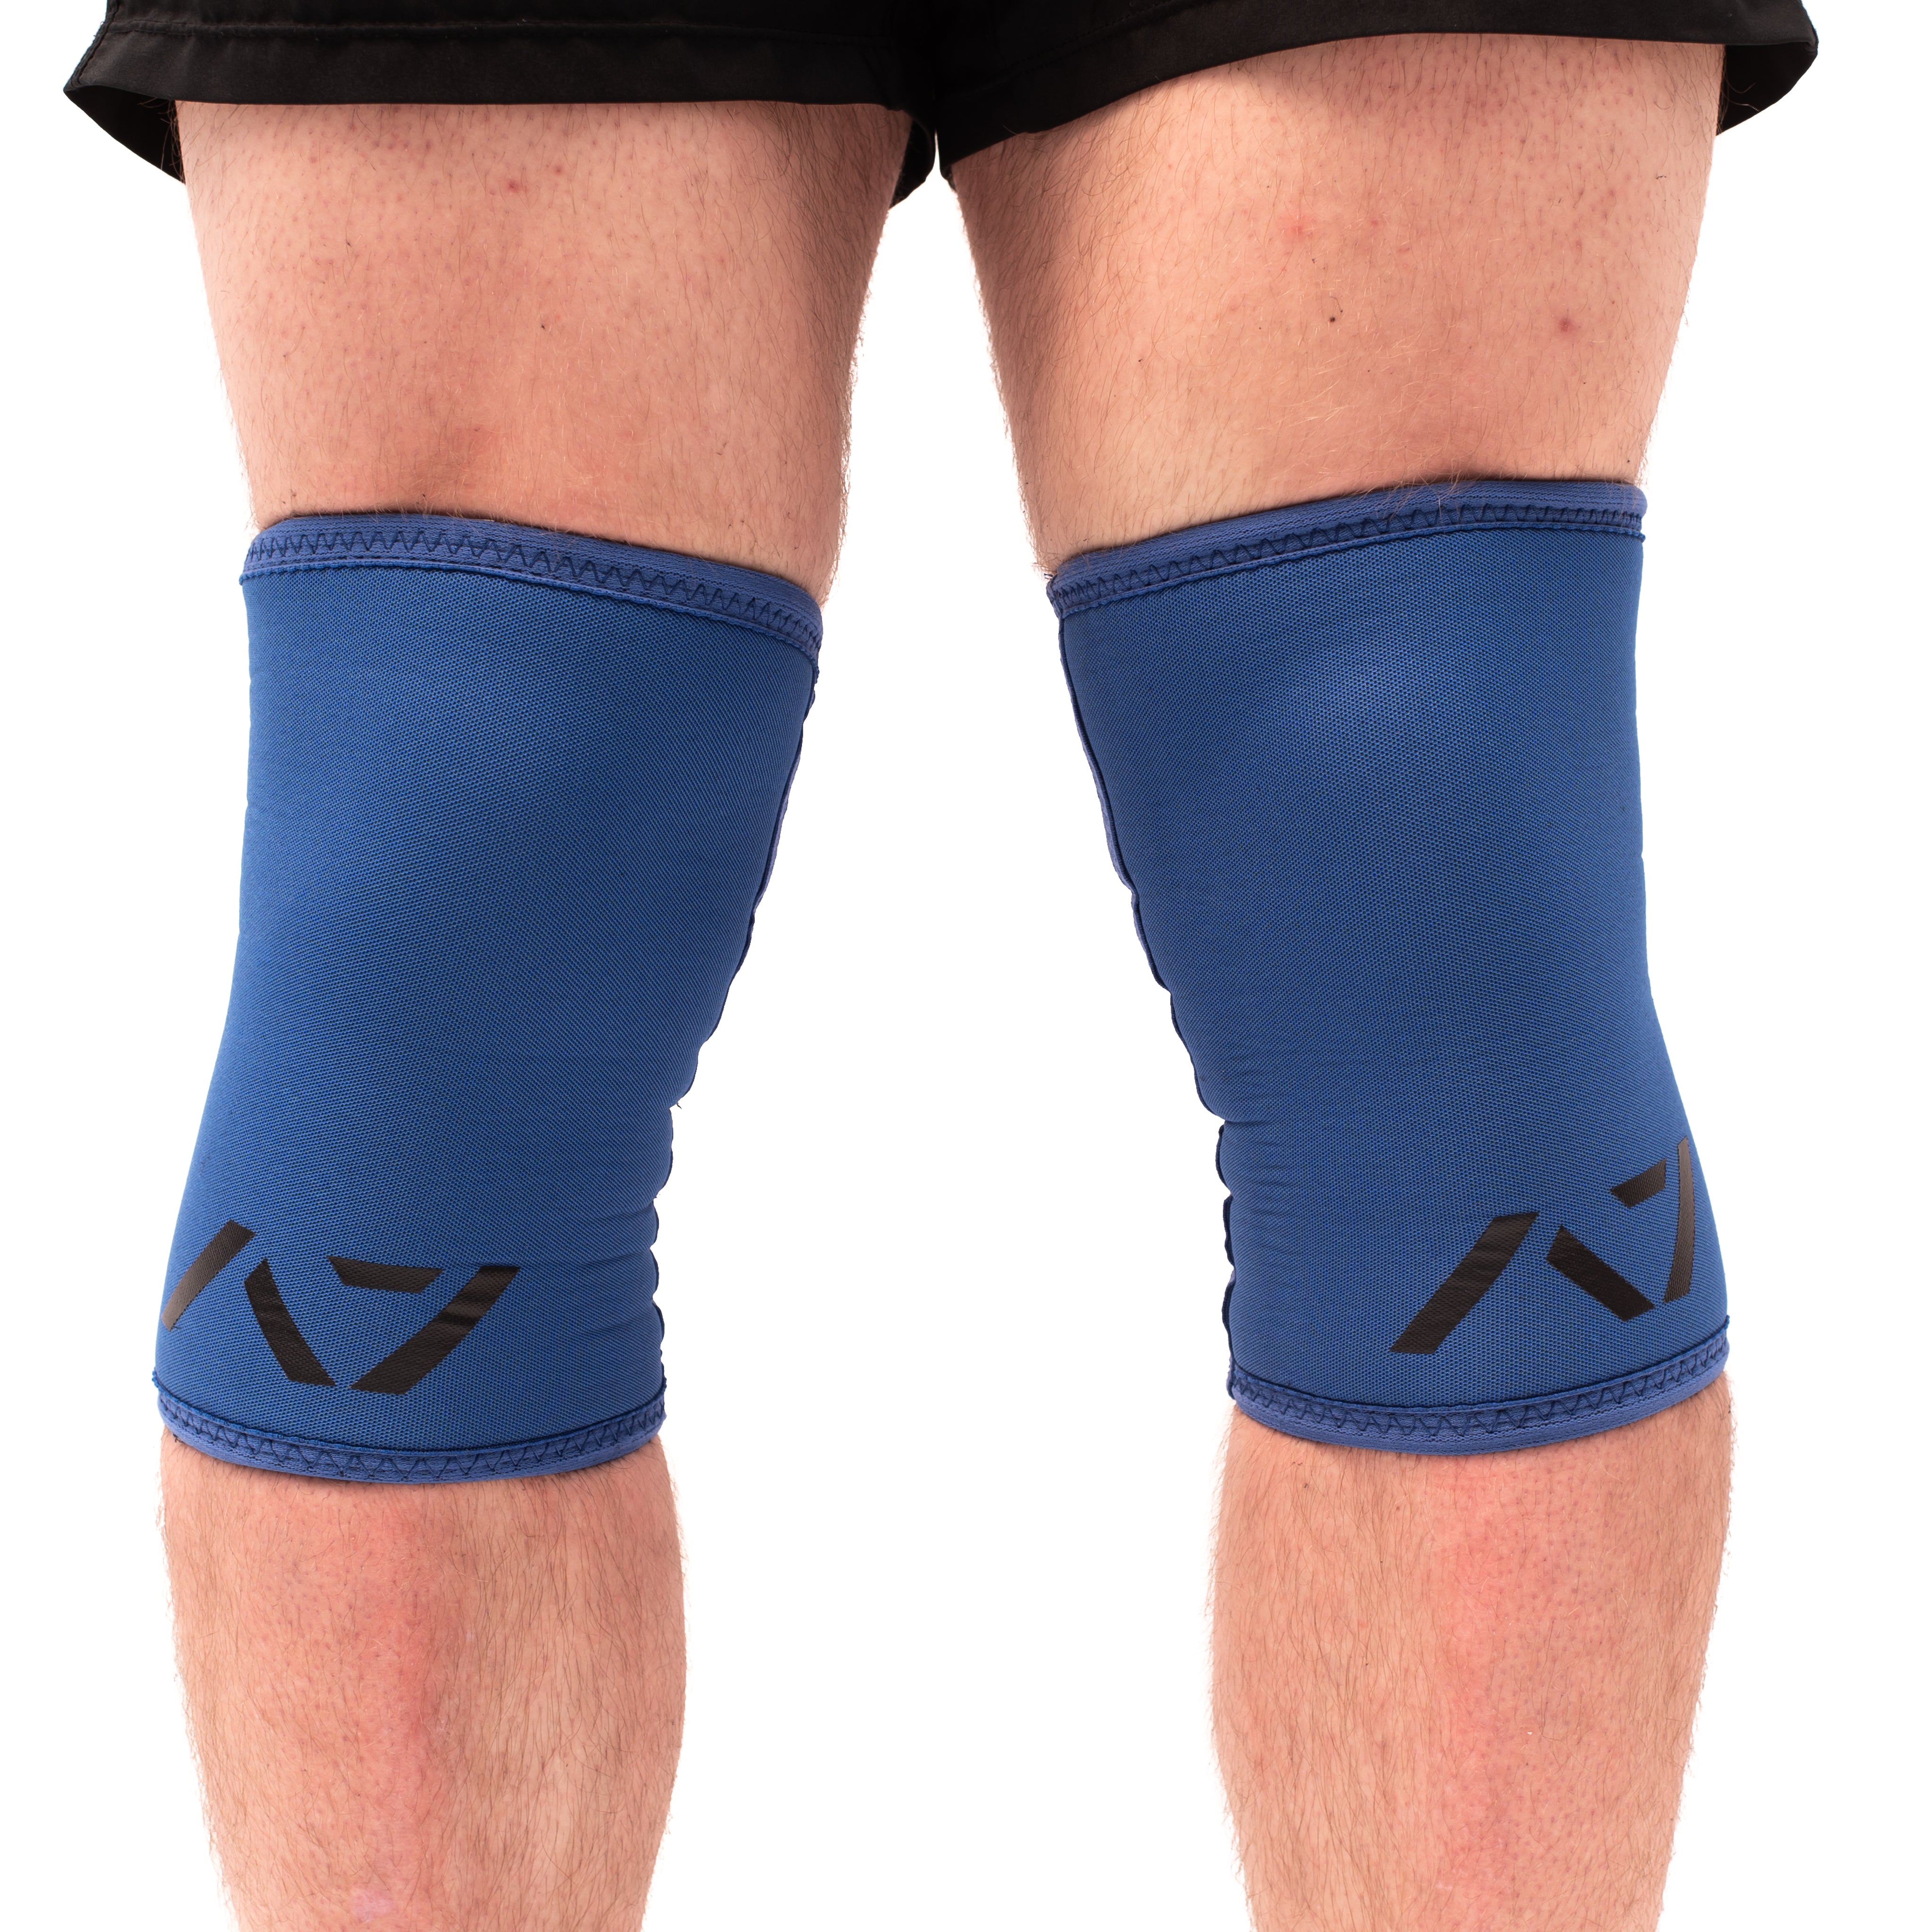 CONE Royal Blue Knee Sleeves - USPA & IPF Approved